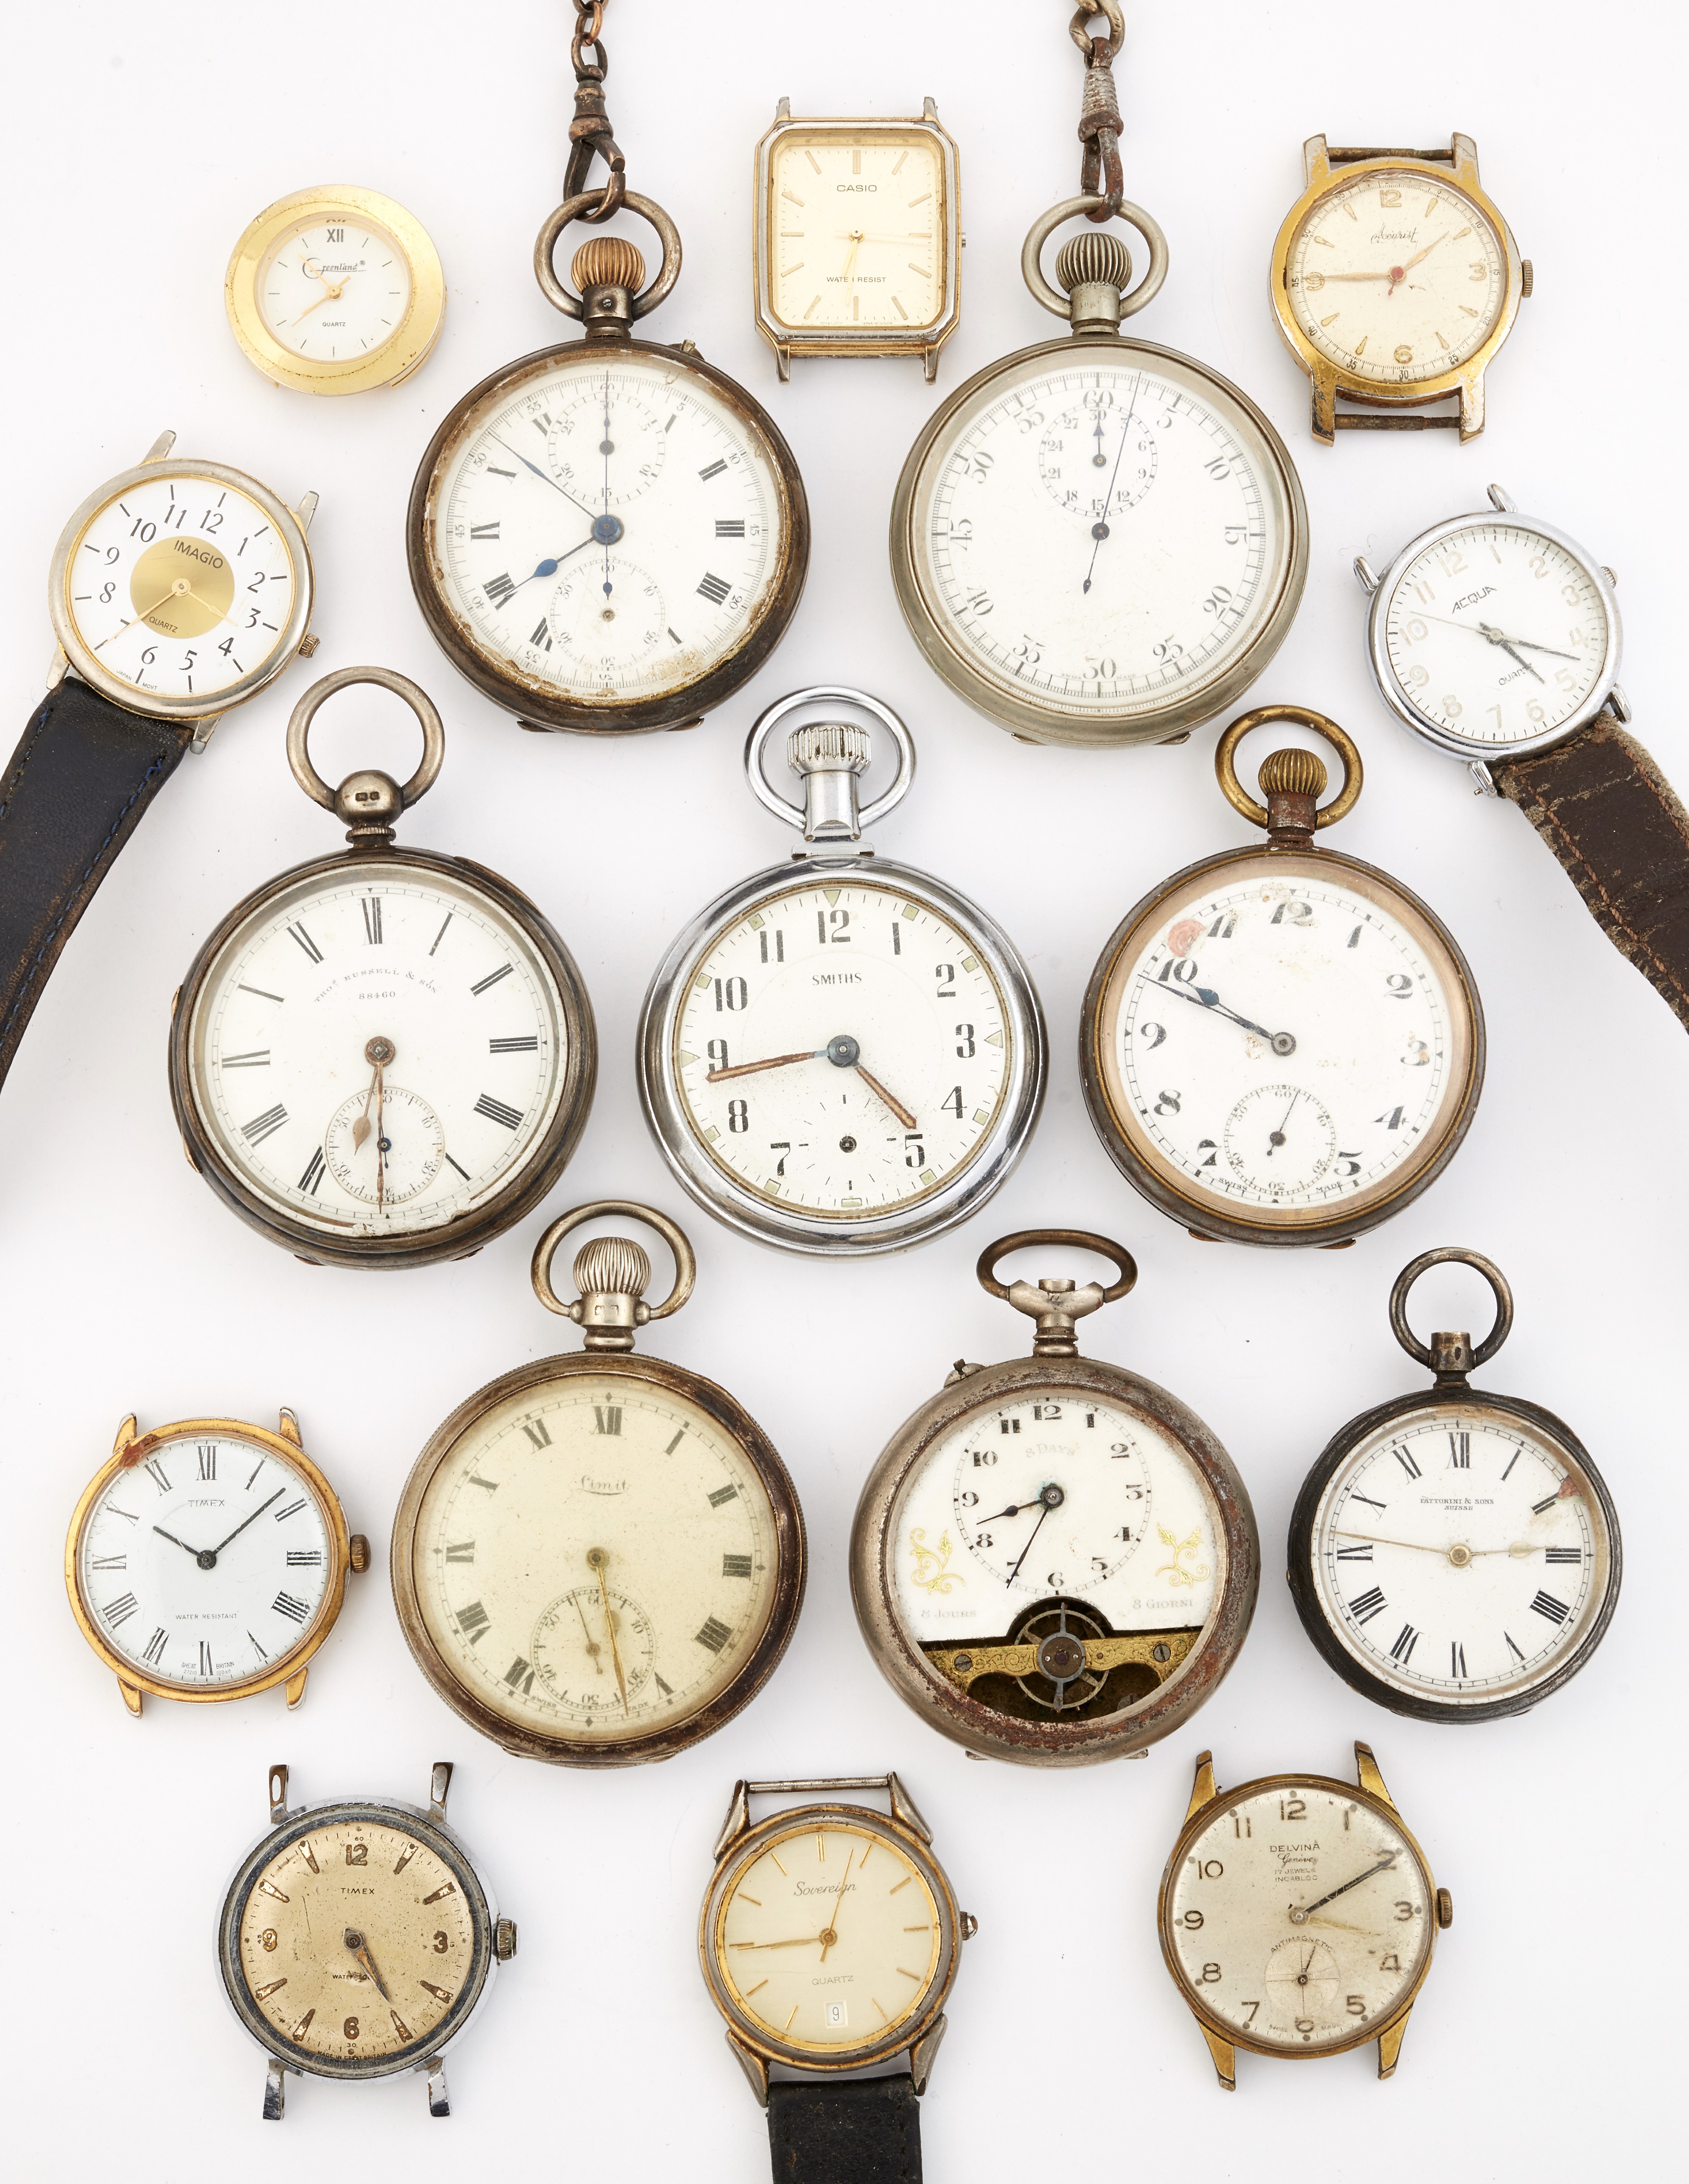 SEVEN VARIOUS OPEN FACED POCKET WATCHES